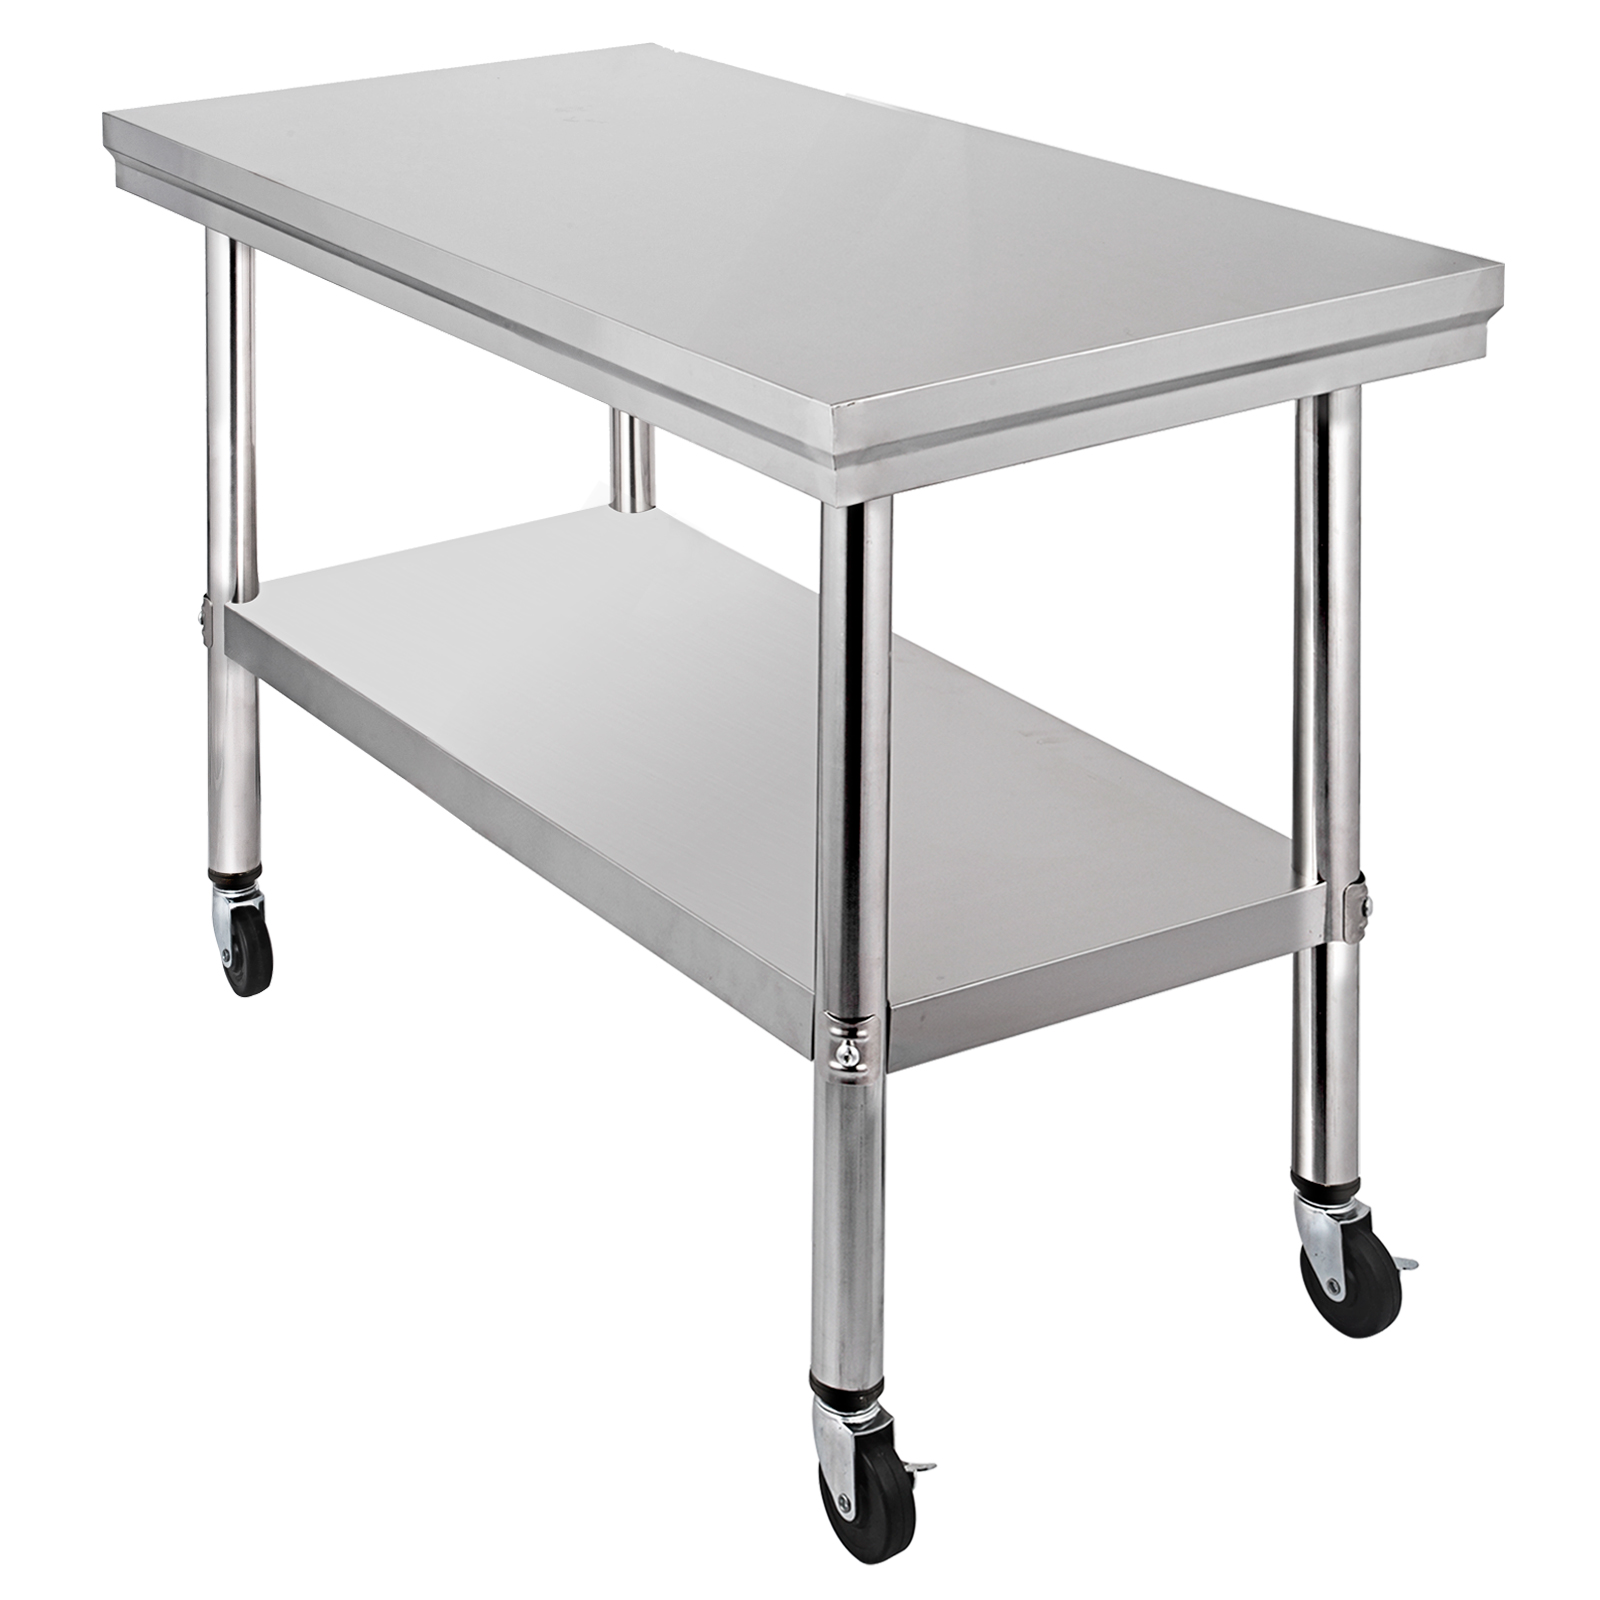 30" x 24" Stainless Steel Work Prep Table with Wheels ...